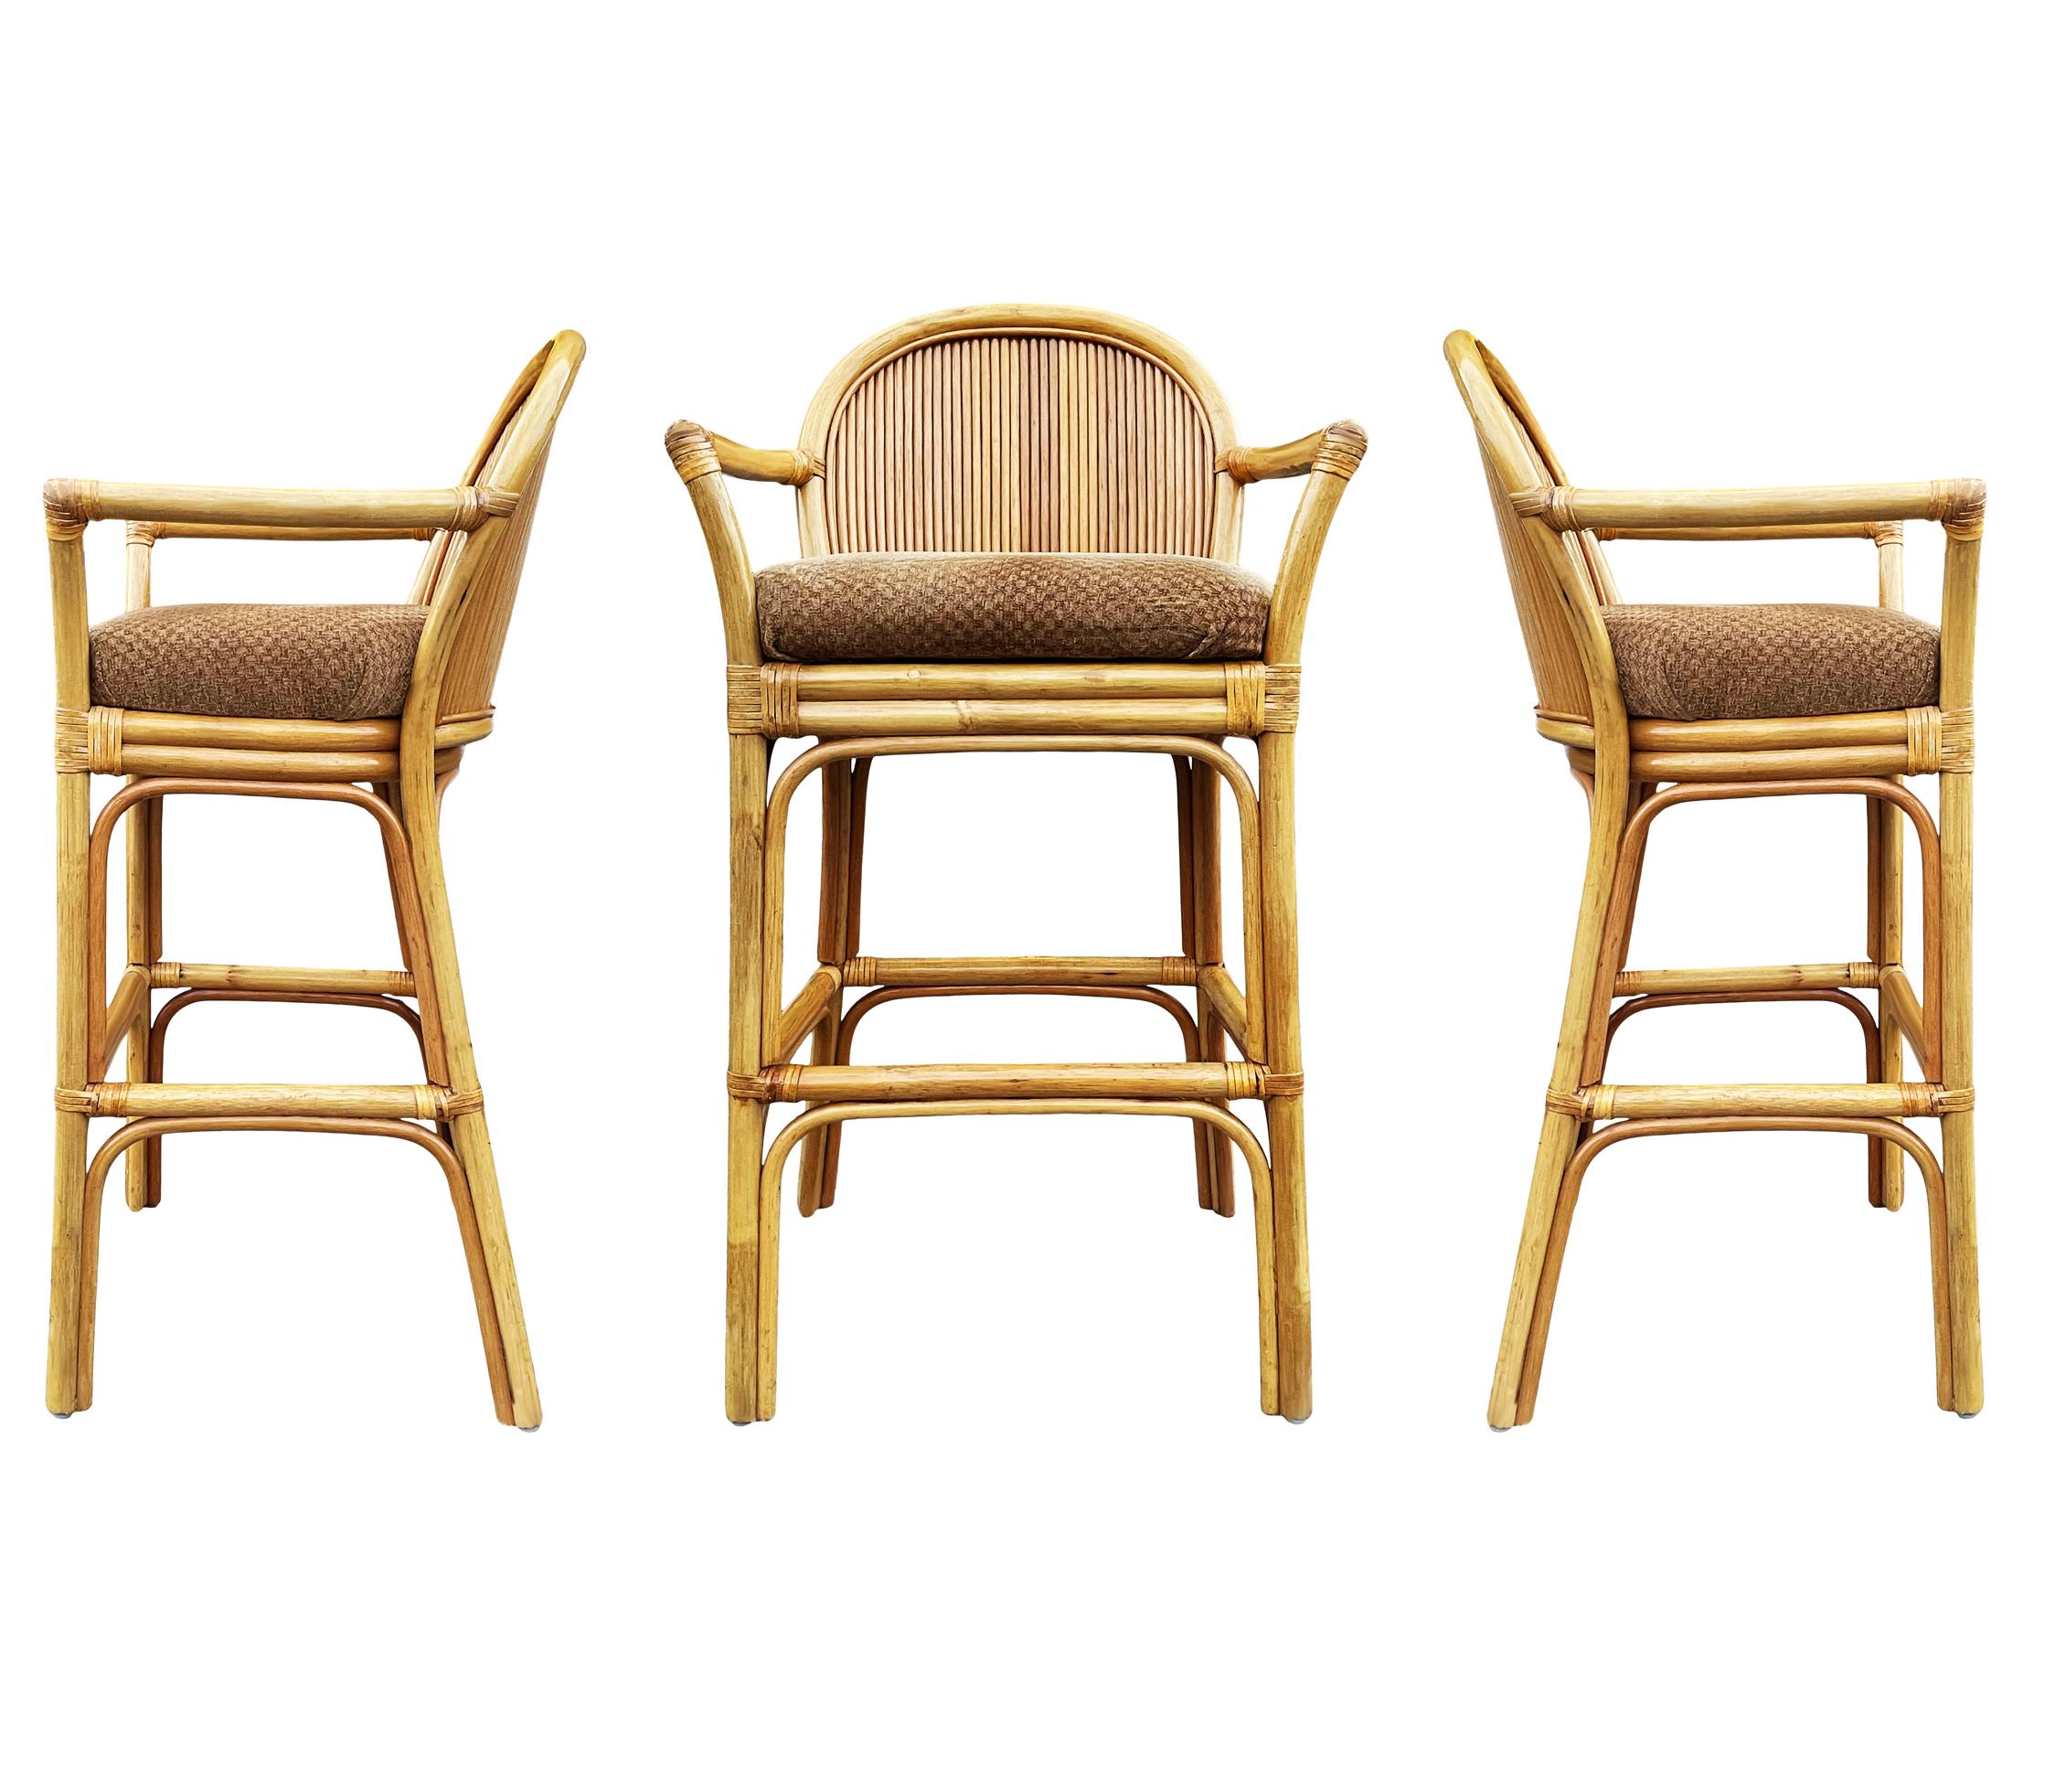 A vintage set of rattan / bamboo barstools circa mid 1970's. These bar stools feature rattan framing with upholstered seats. Fabric is original so recovering is recommended.